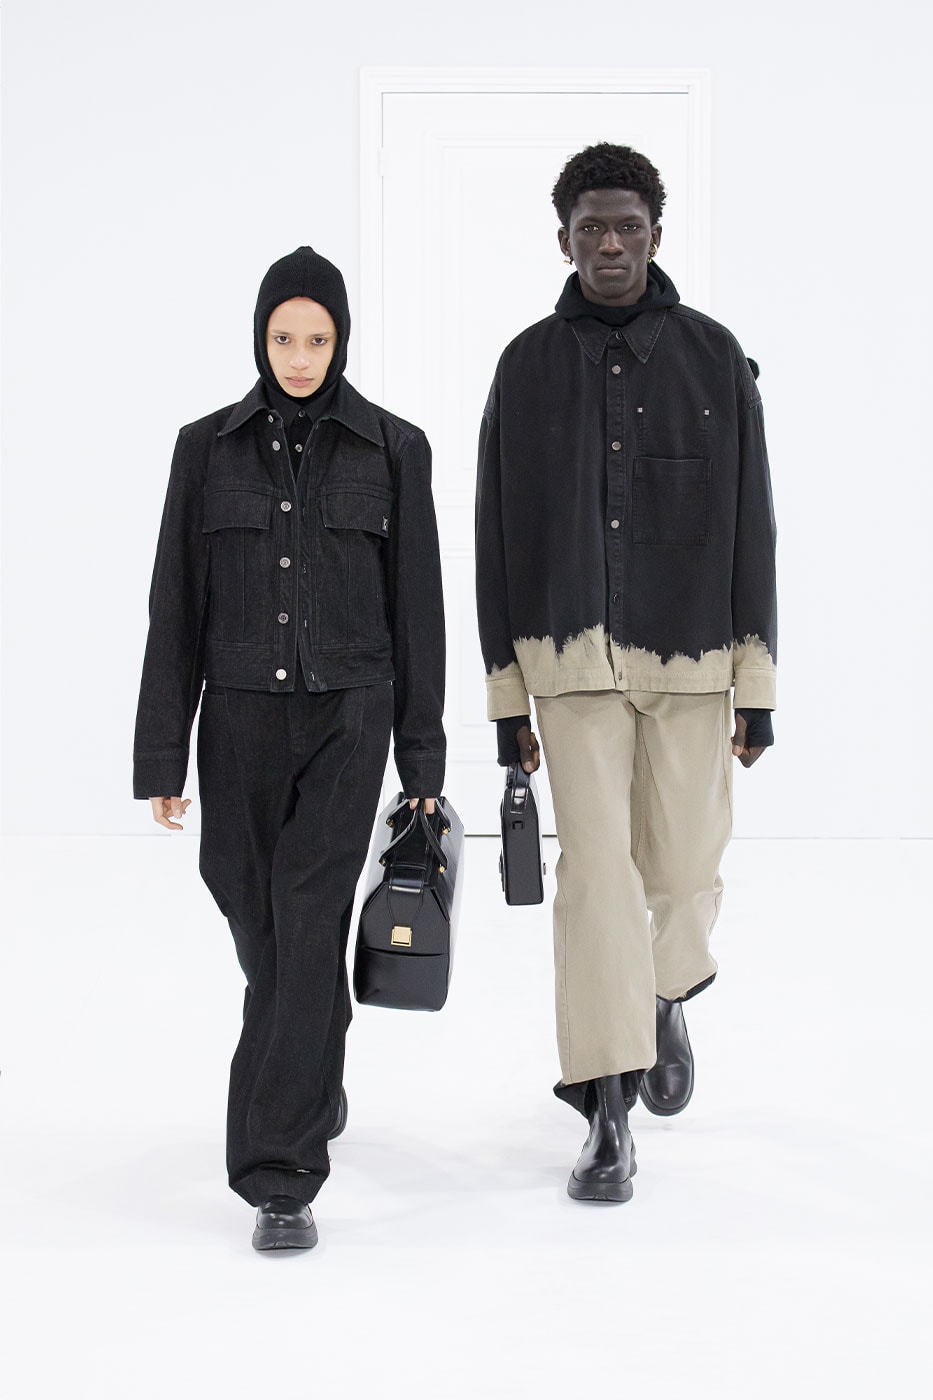 LOEWE FW22 Collection Showcases the Beauty in Imperfection